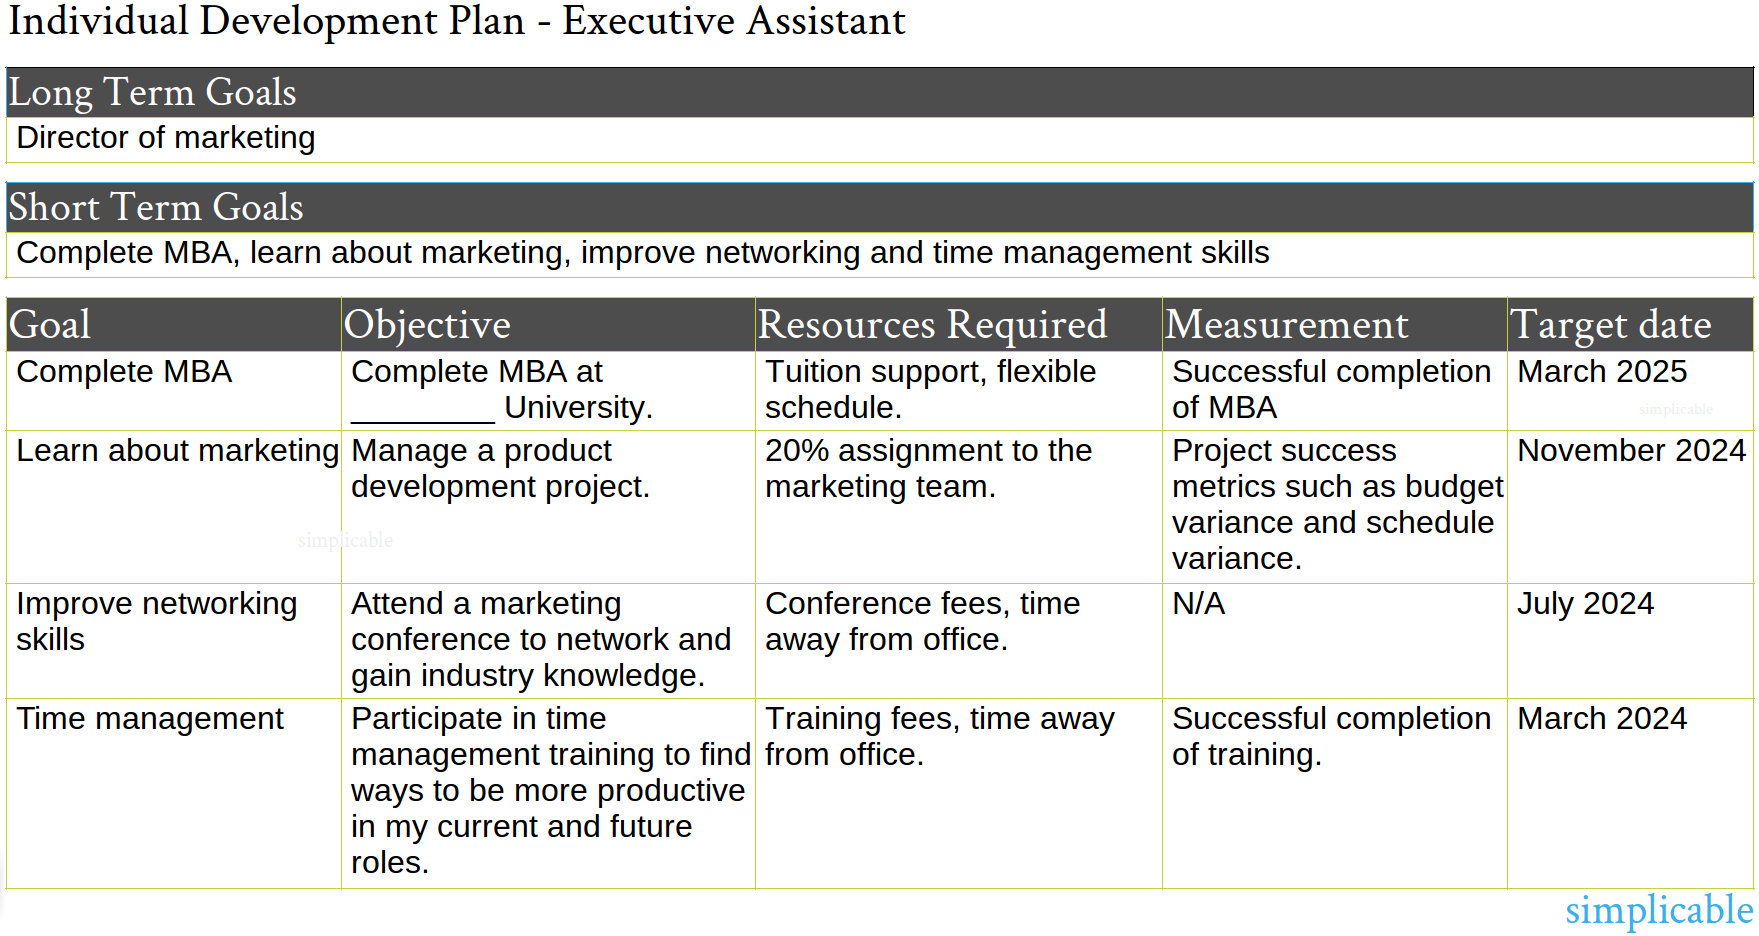 Example individual development plan for an executive assistant who plans a career change.